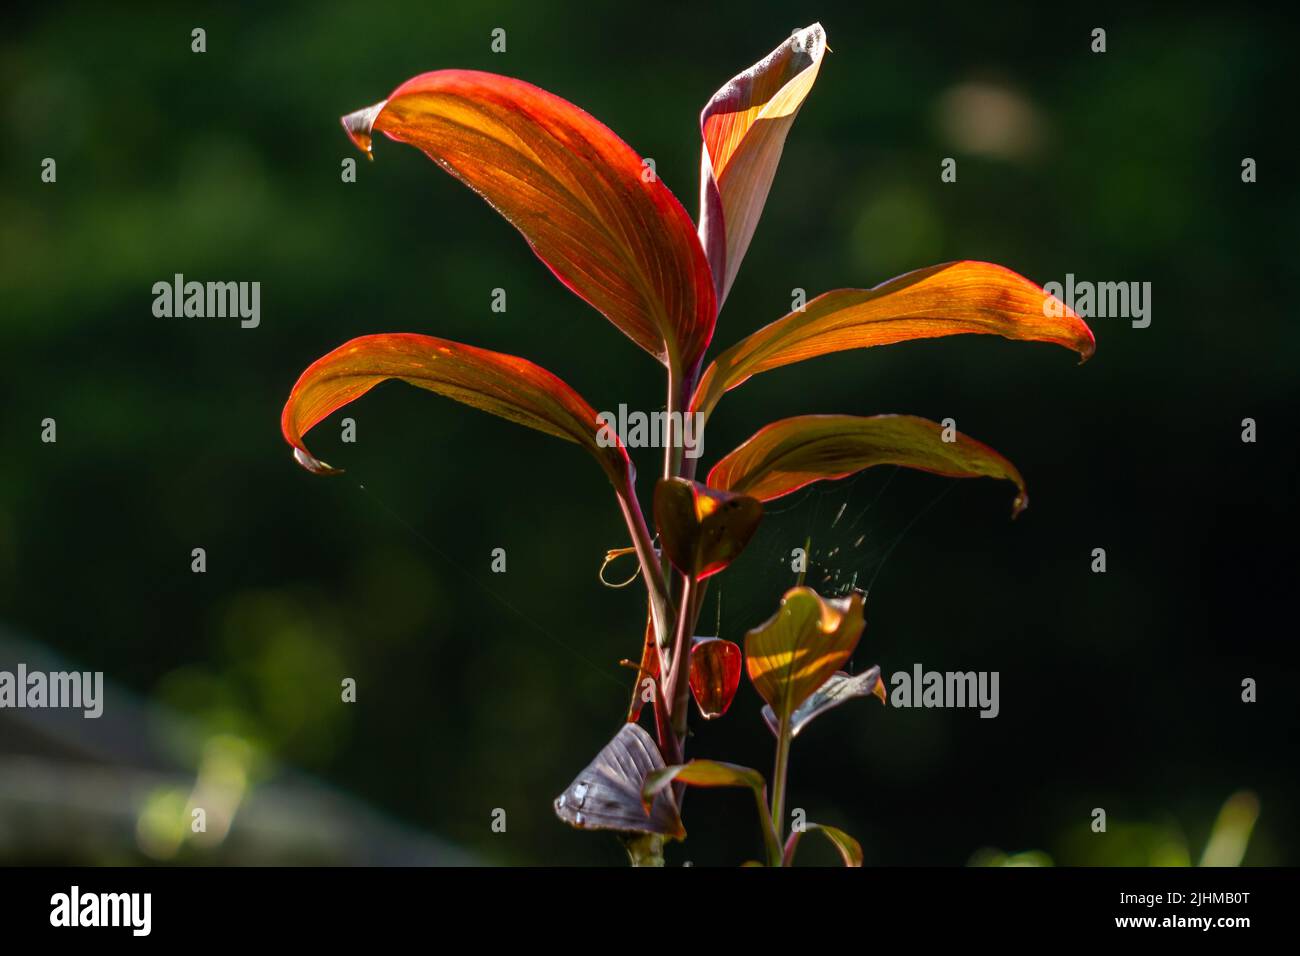 Broadleaf palm lily plant which has a combination of green and red leaf colors, natural vegetation of tropical forests Stock Photo